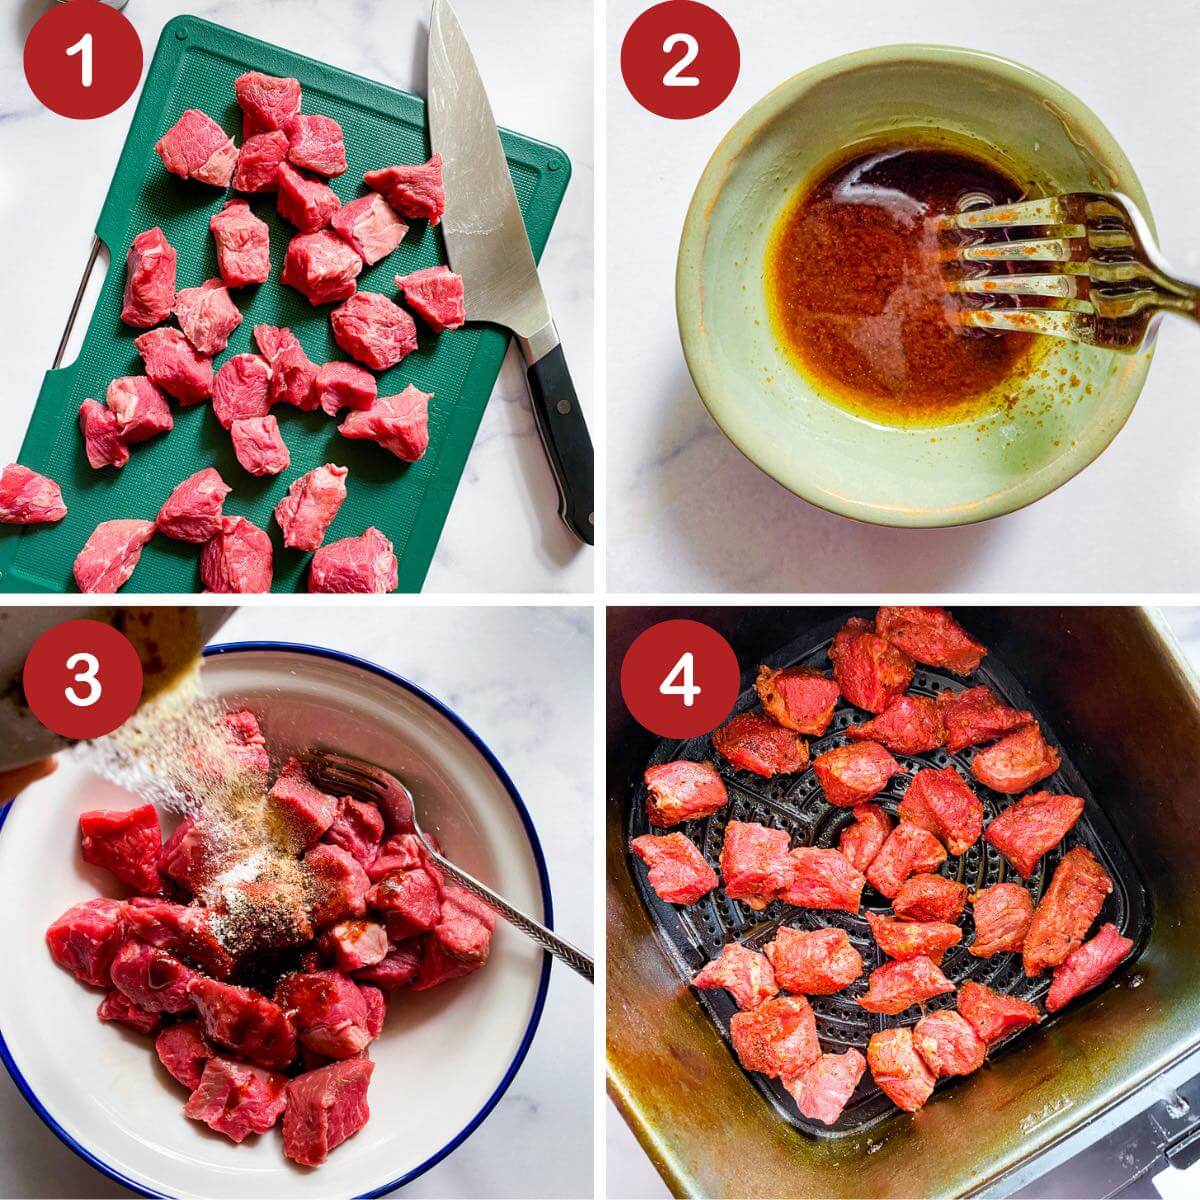 four square photo- 1. raw steak cut into small bite size cubes on a green cutting board with a knife on the side. 2. a small bowl with oil being mixed with seasoning by a fork. 3. bowl with cubes of steak, a fork, and seasoning being sprinkled on top. 4. steak bites in the air fryer before cooking 